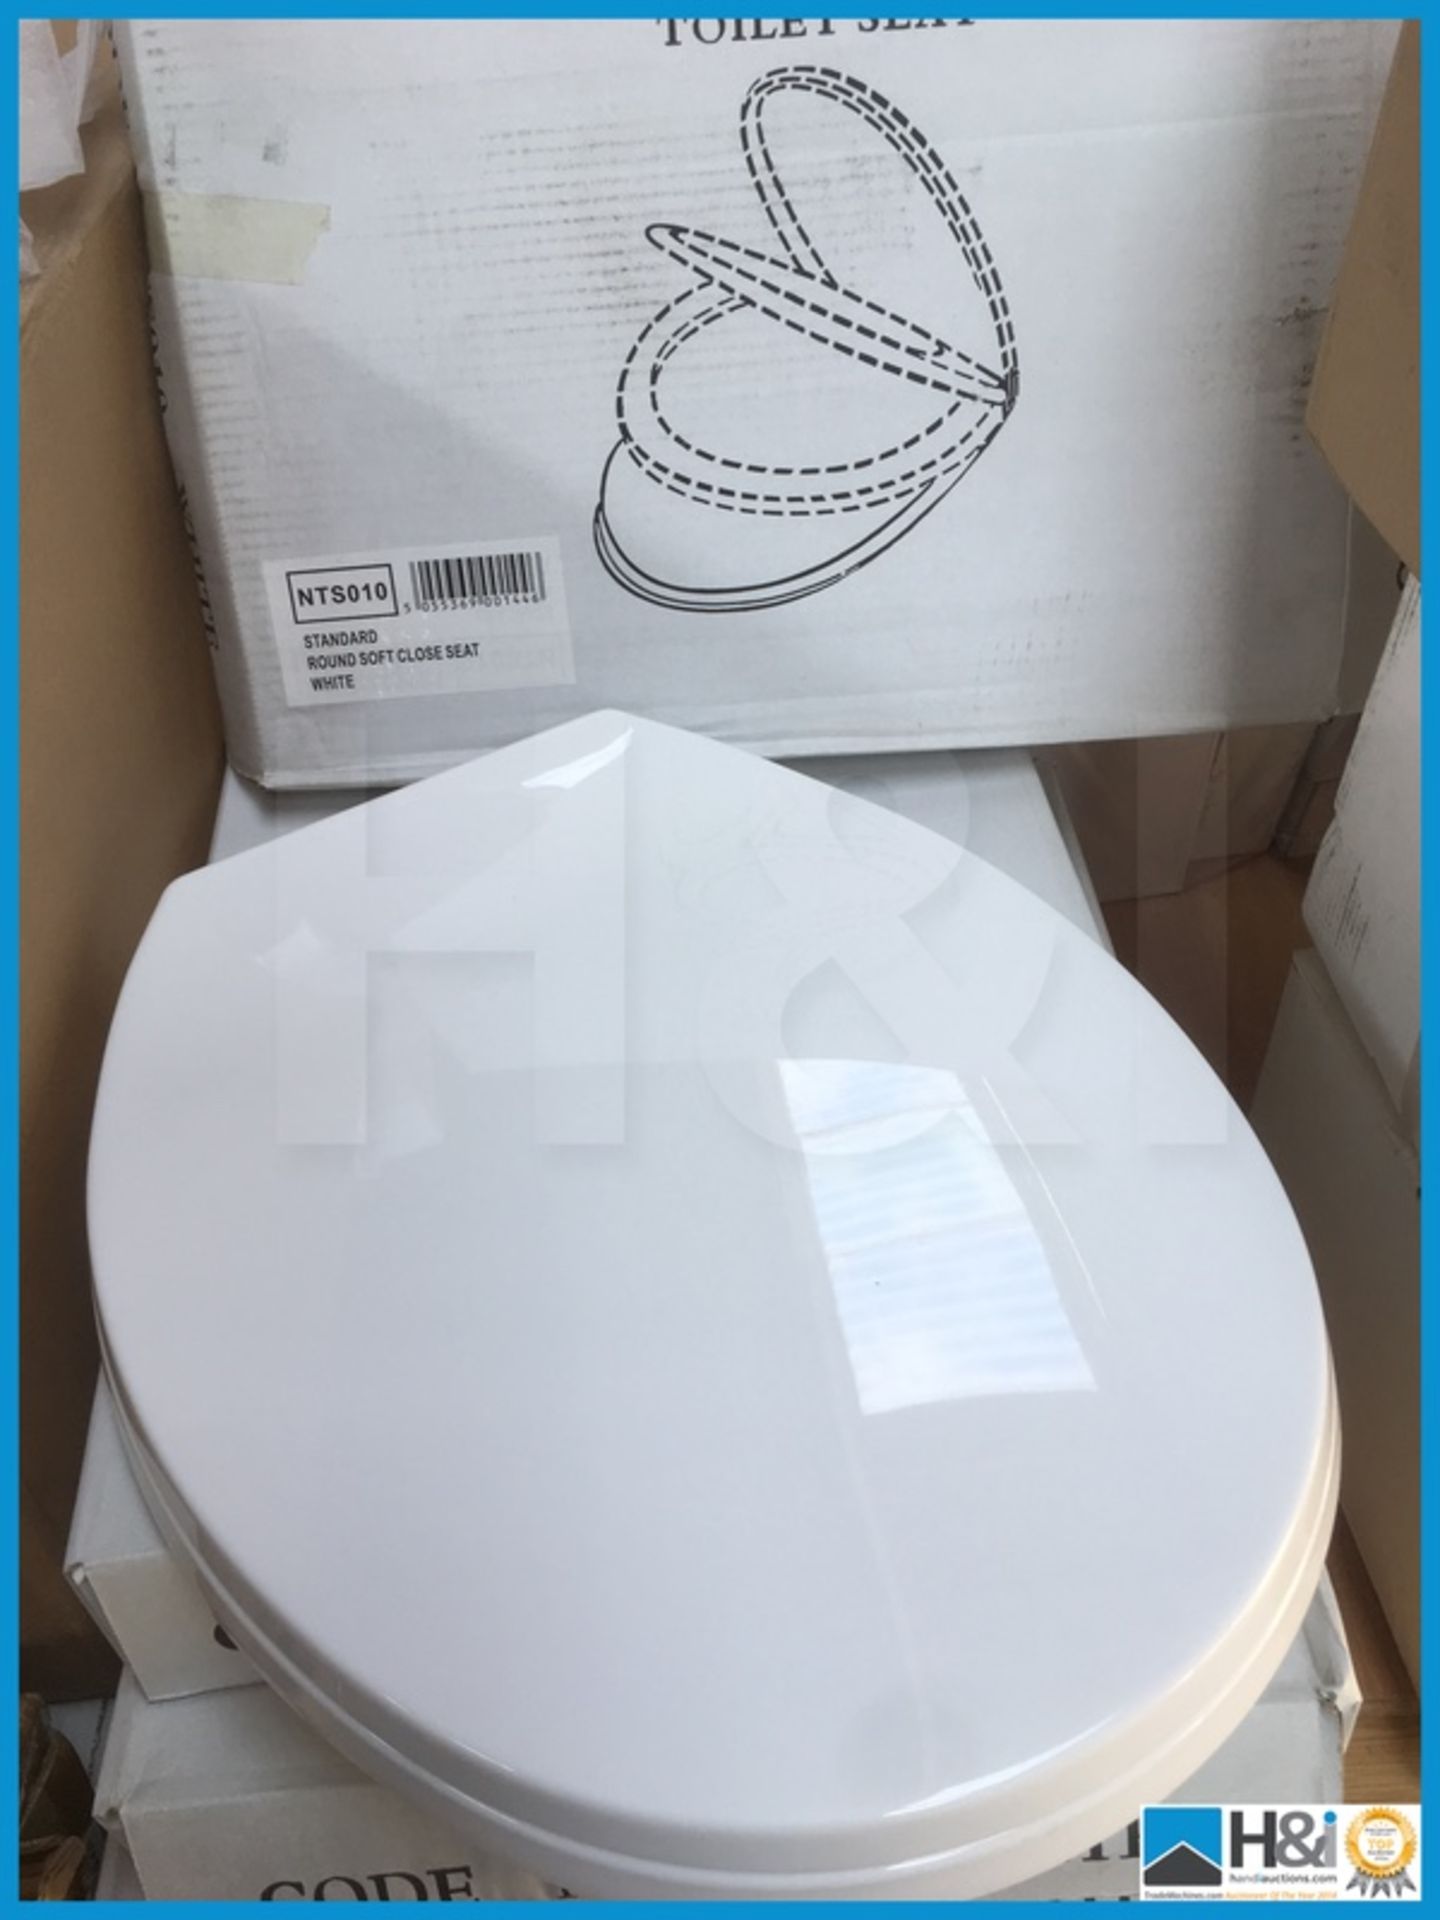 Ultra NTS010 standard round soft close toilet seat. New and boxed. Suggested manufacturers selling